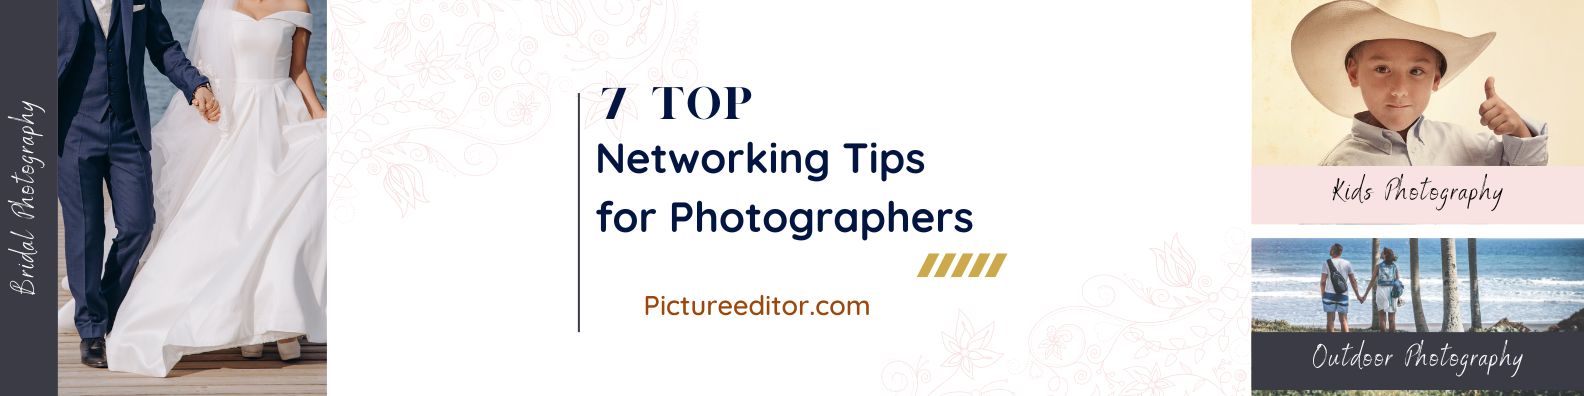 7 Top Networking Tips for Photographers